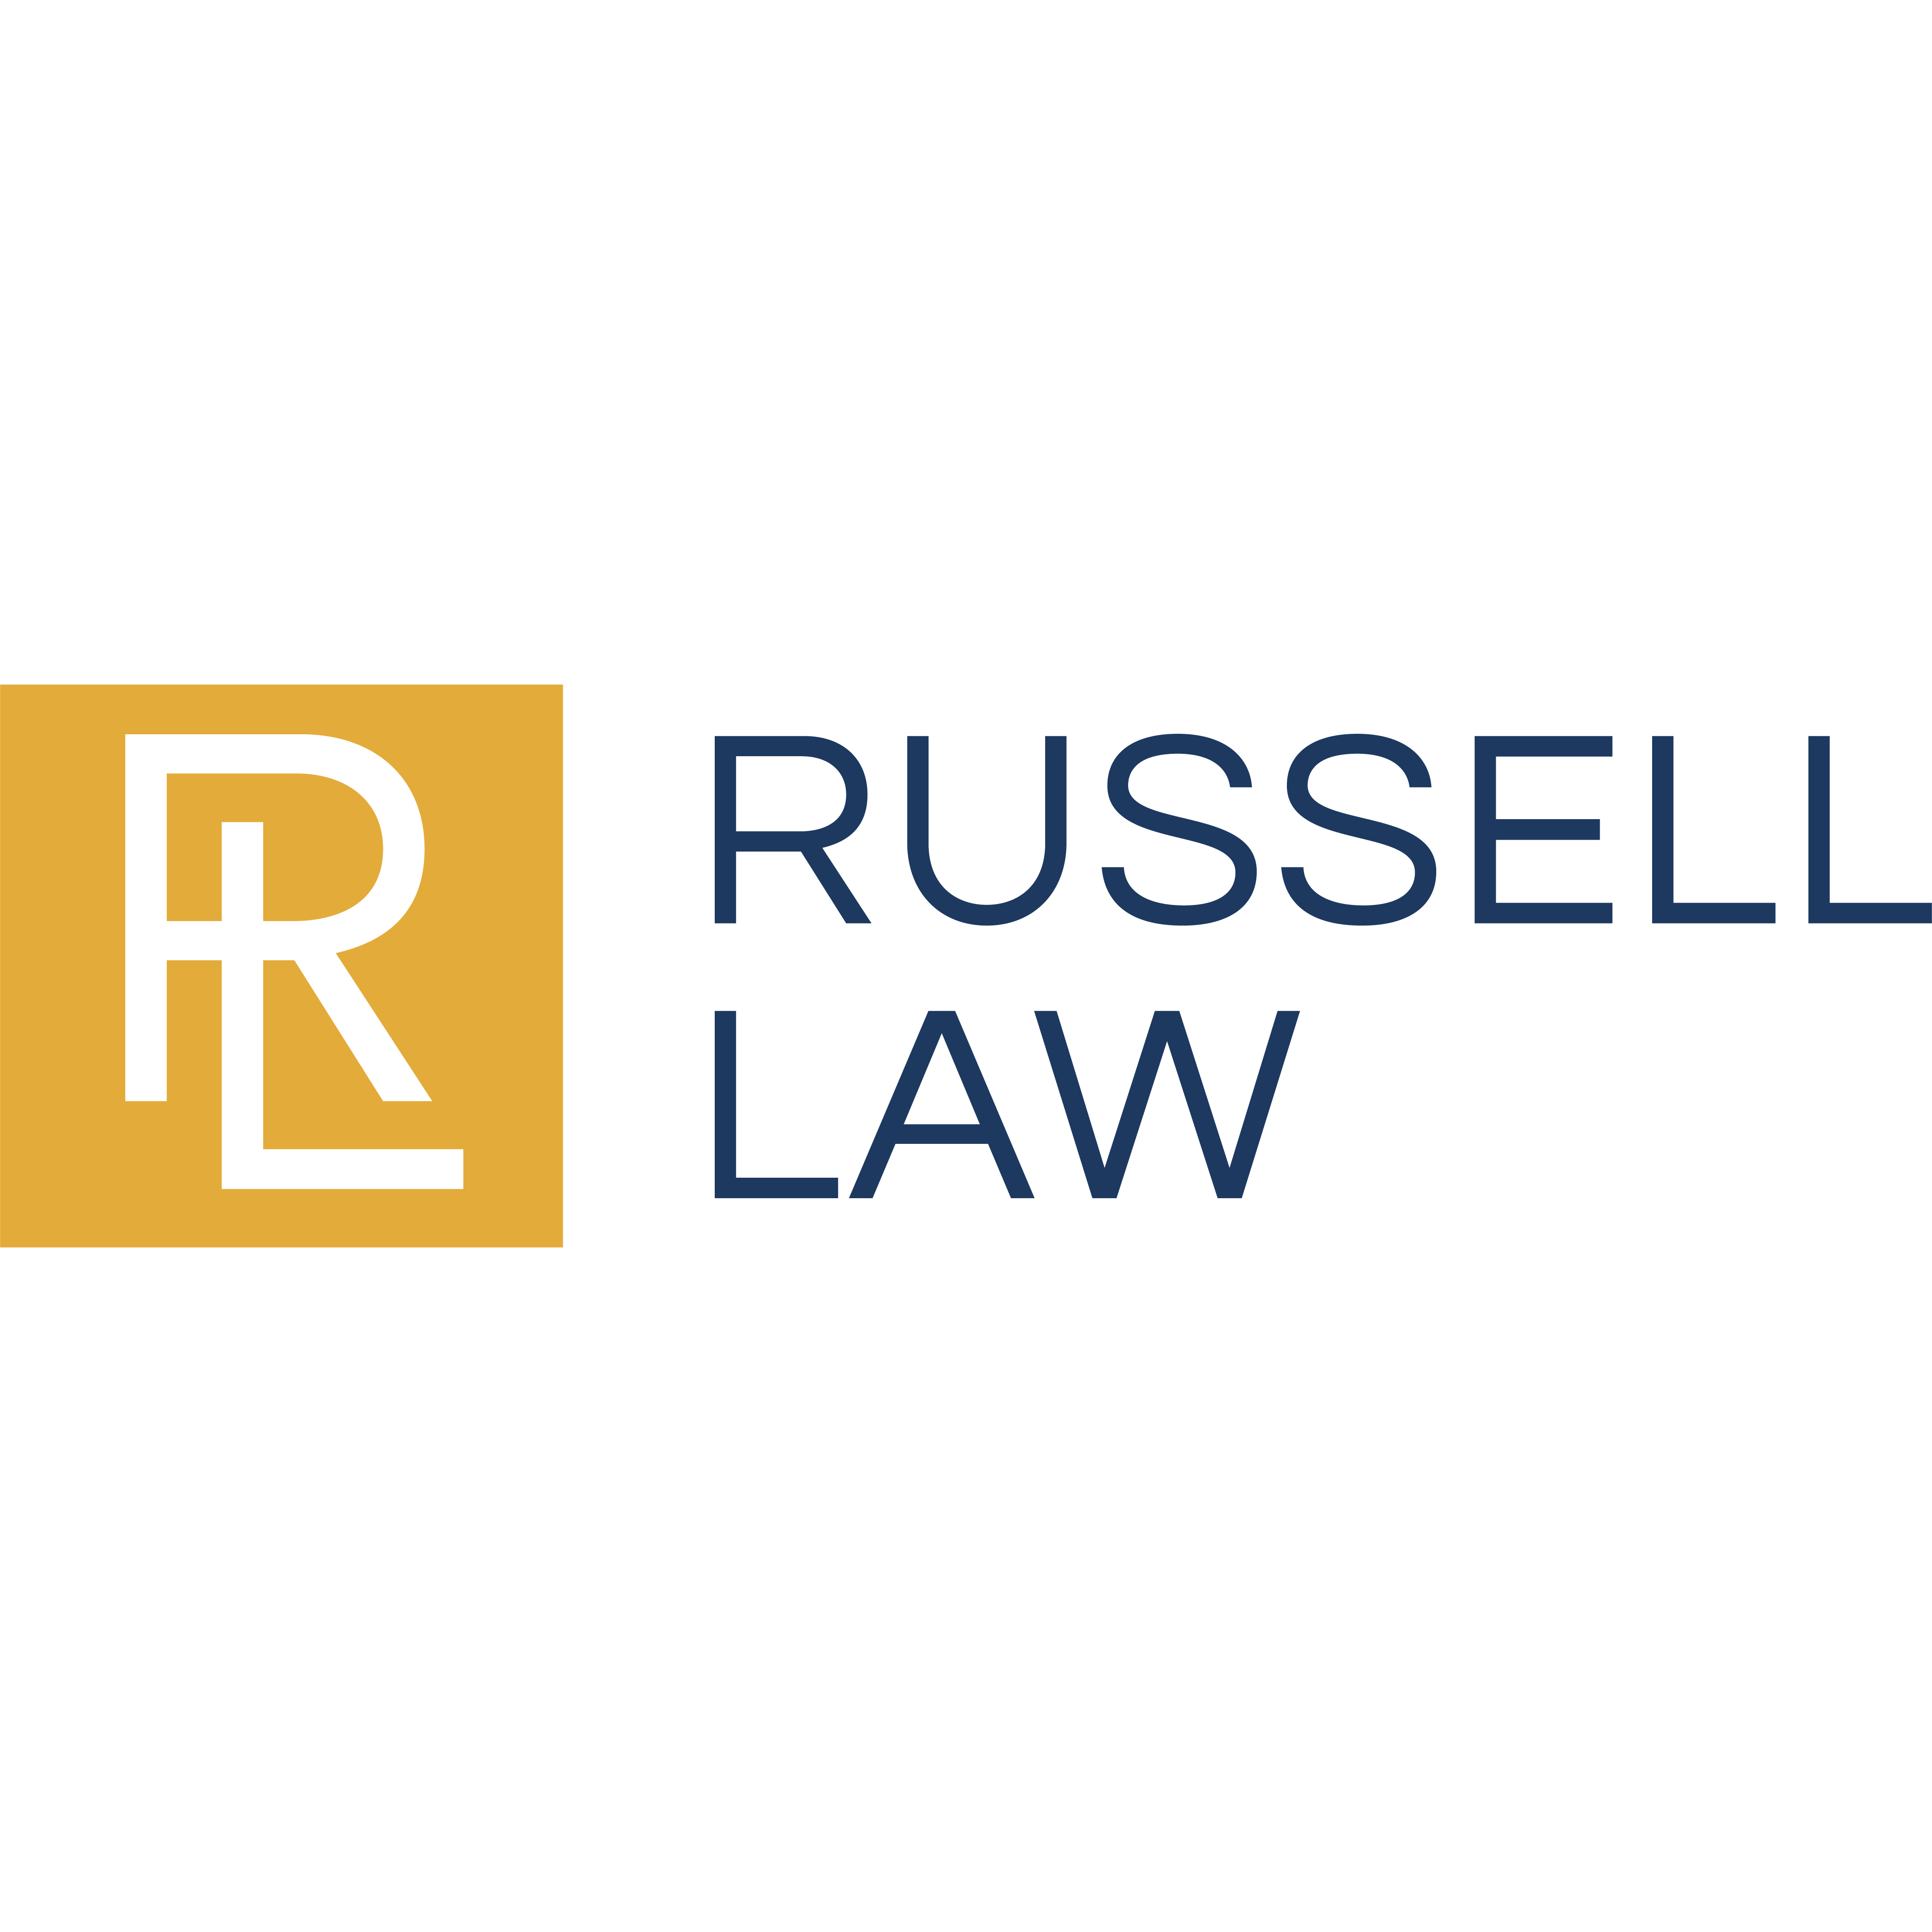 Russell Law | Estate Planning Attorneys - Huntingdon Valley, PA 19006 - (215)914-8112 | ShowMeLocal.com